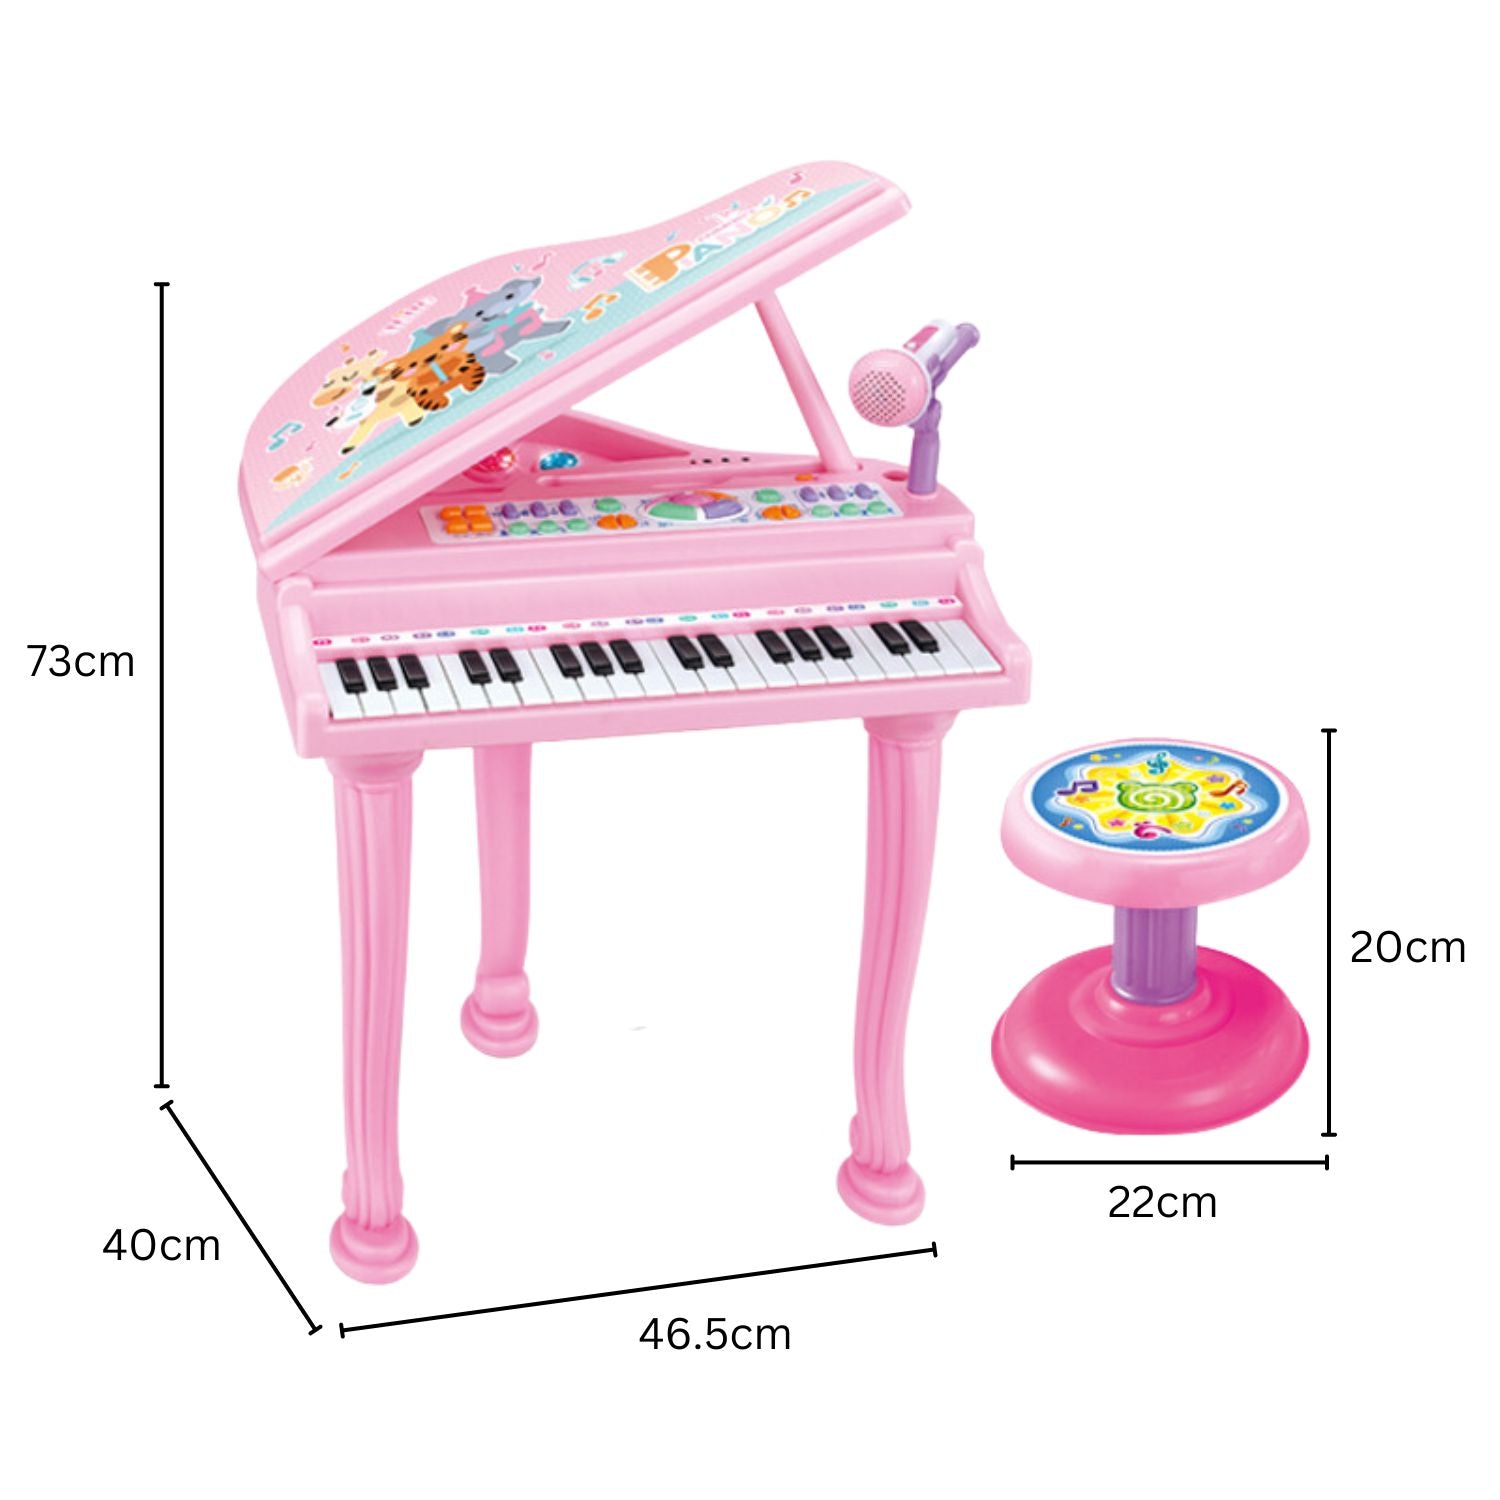 GOMINIMO Kids Electronic Piano Keyboard Toy with Microphone and Chair (Pink)